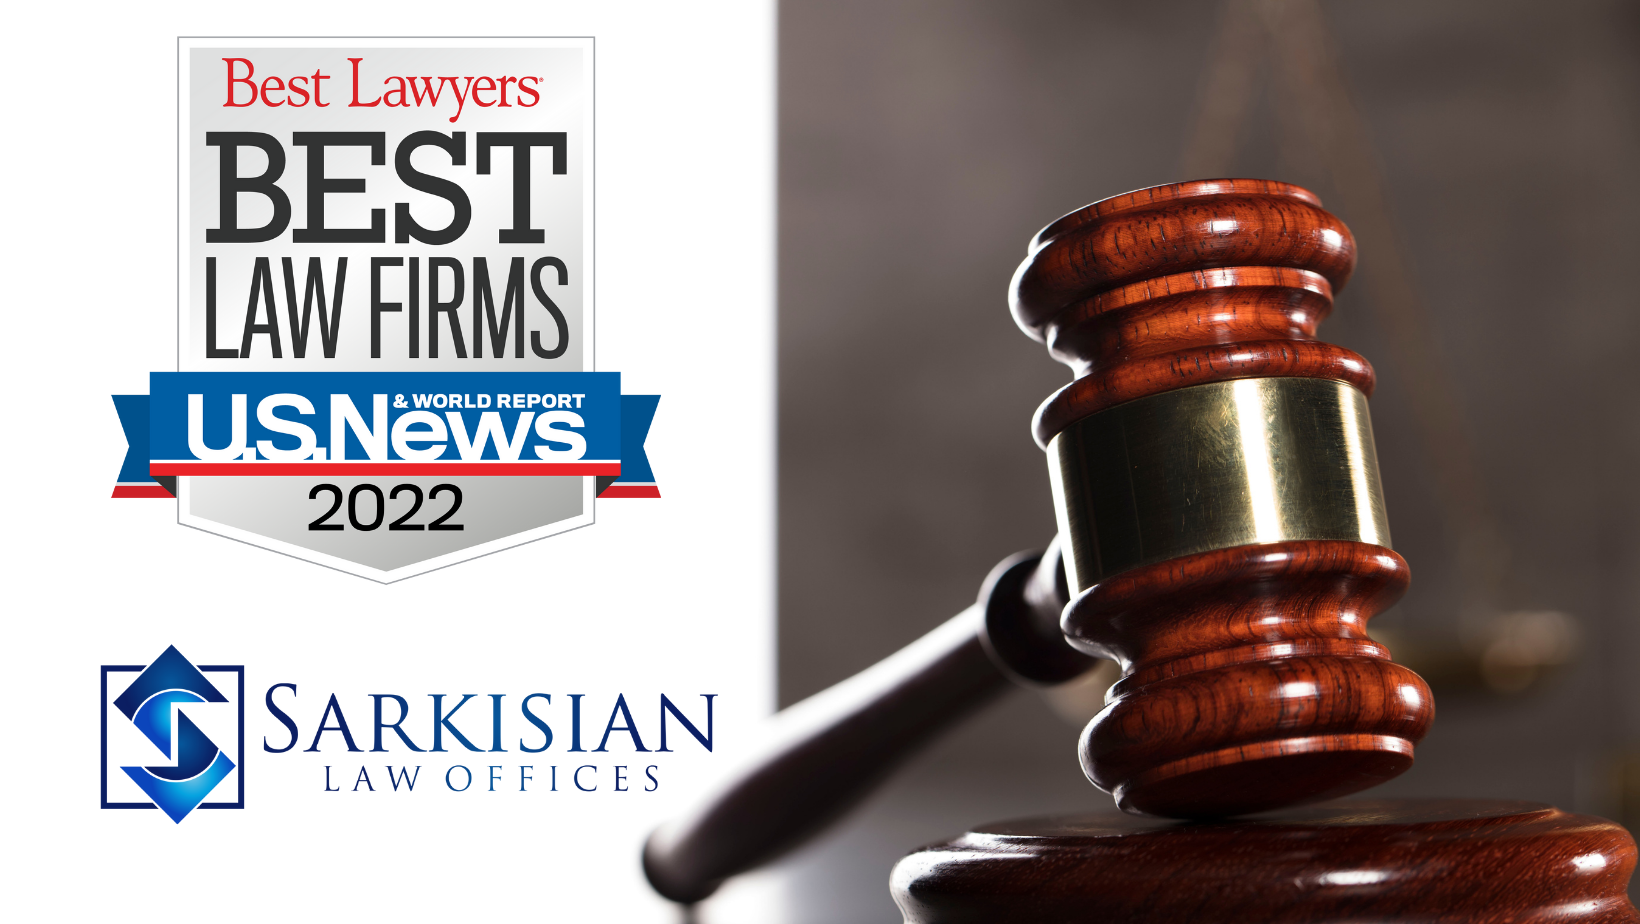 Sarkisian Law Offices Best Law Firm 2022 Valparaiso